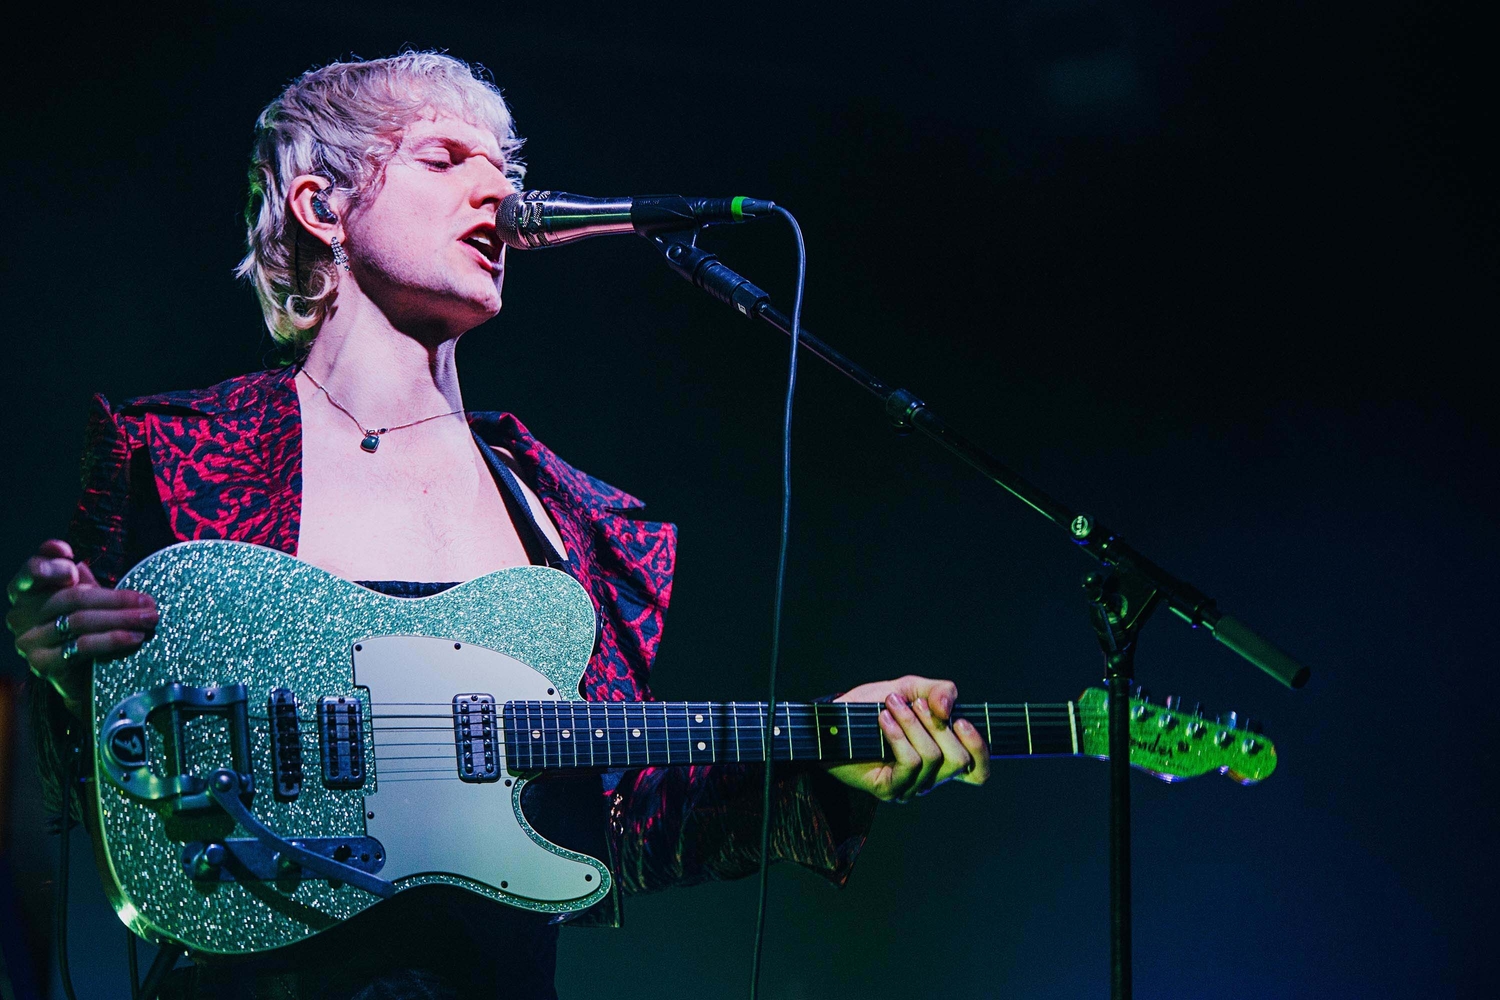 Sundara Karma, The Magic Gang, Pale Waves and more confirmed for Tramlines 2020